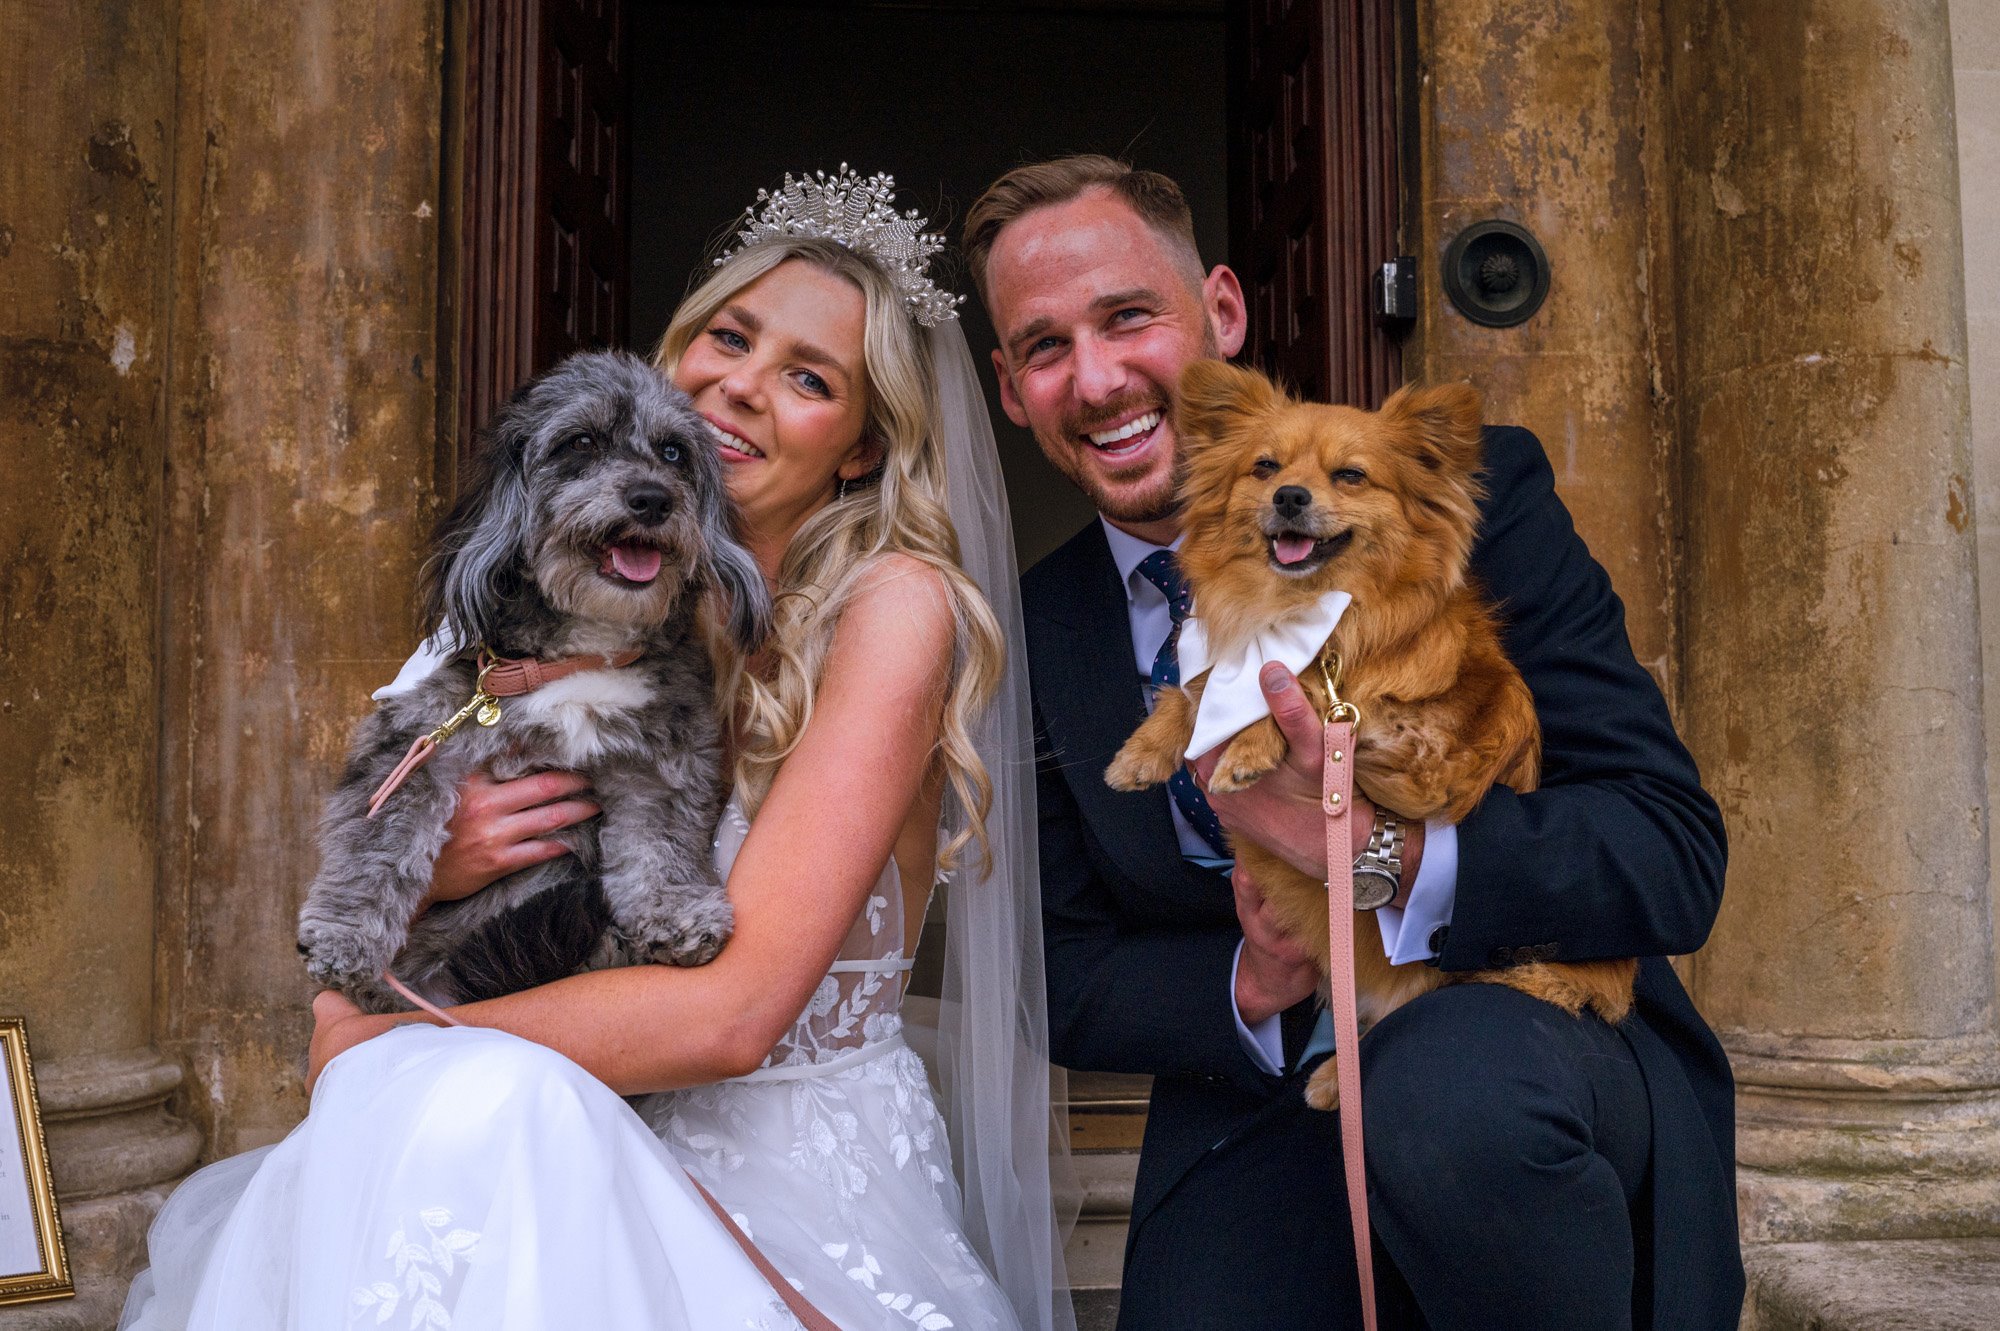 Boho bride and groom sit on steps of stately home wedding venue with their dogs in white bows. Bride wears boho lace and tulle wedding dress and pearl crown